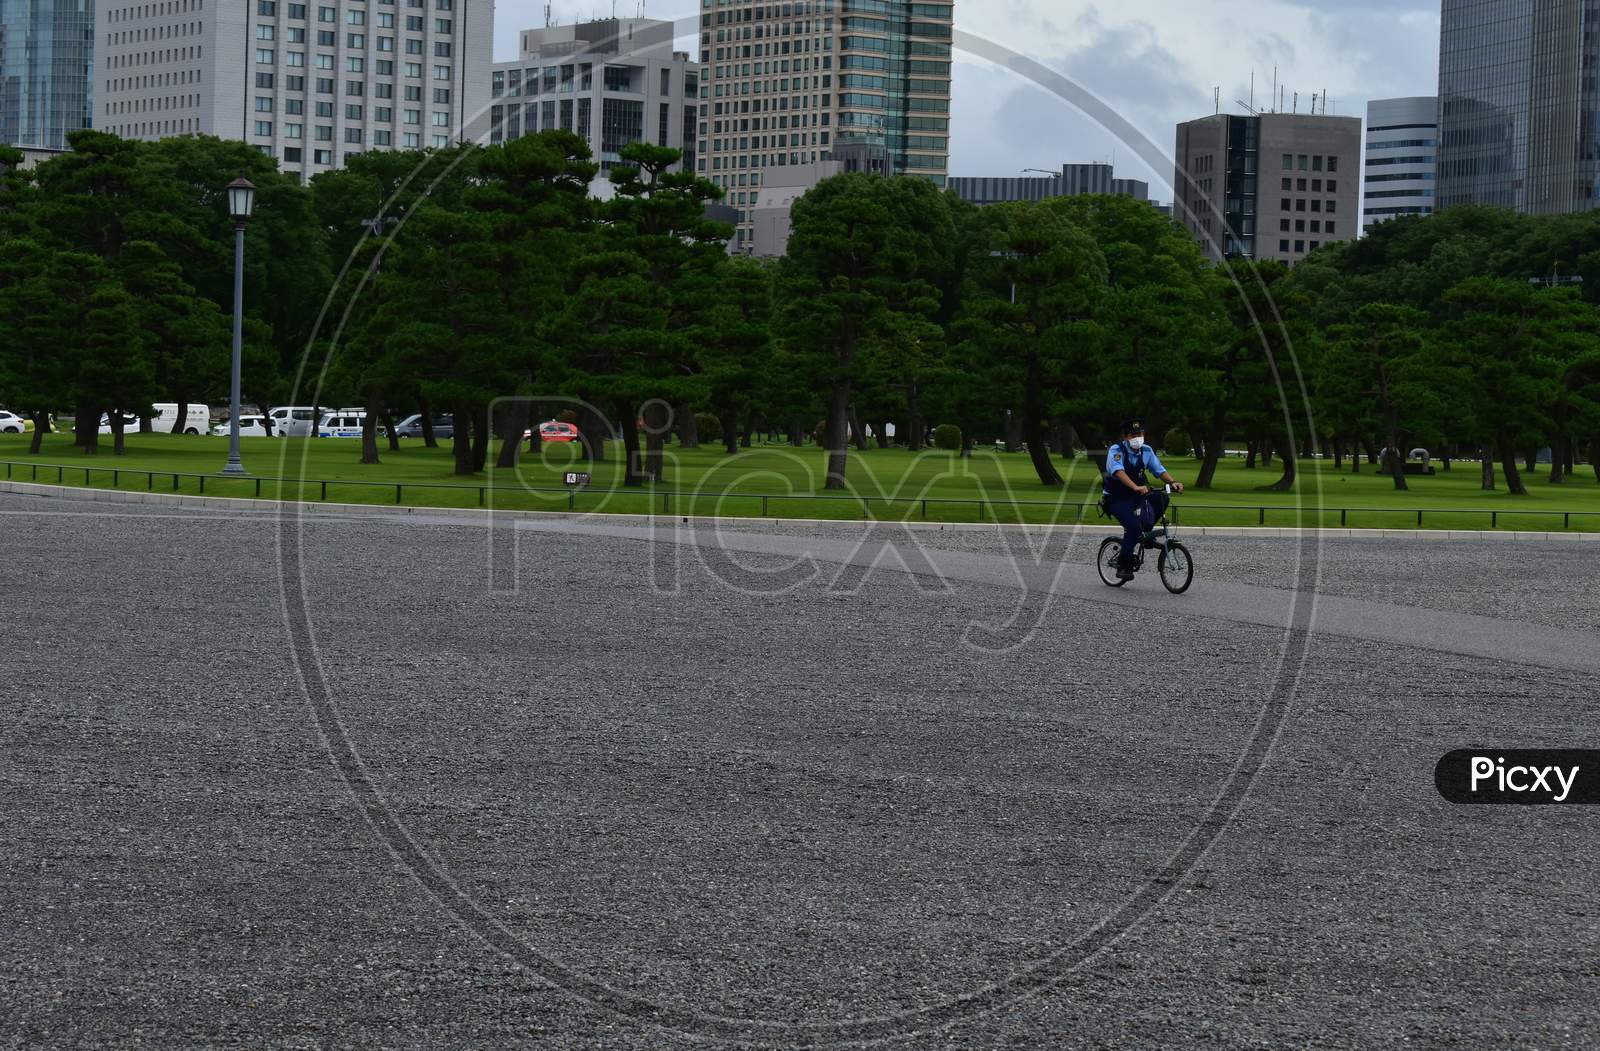 The policeman with a mask circulating alone in the empty imperial palace front garden in Tokyo Japan